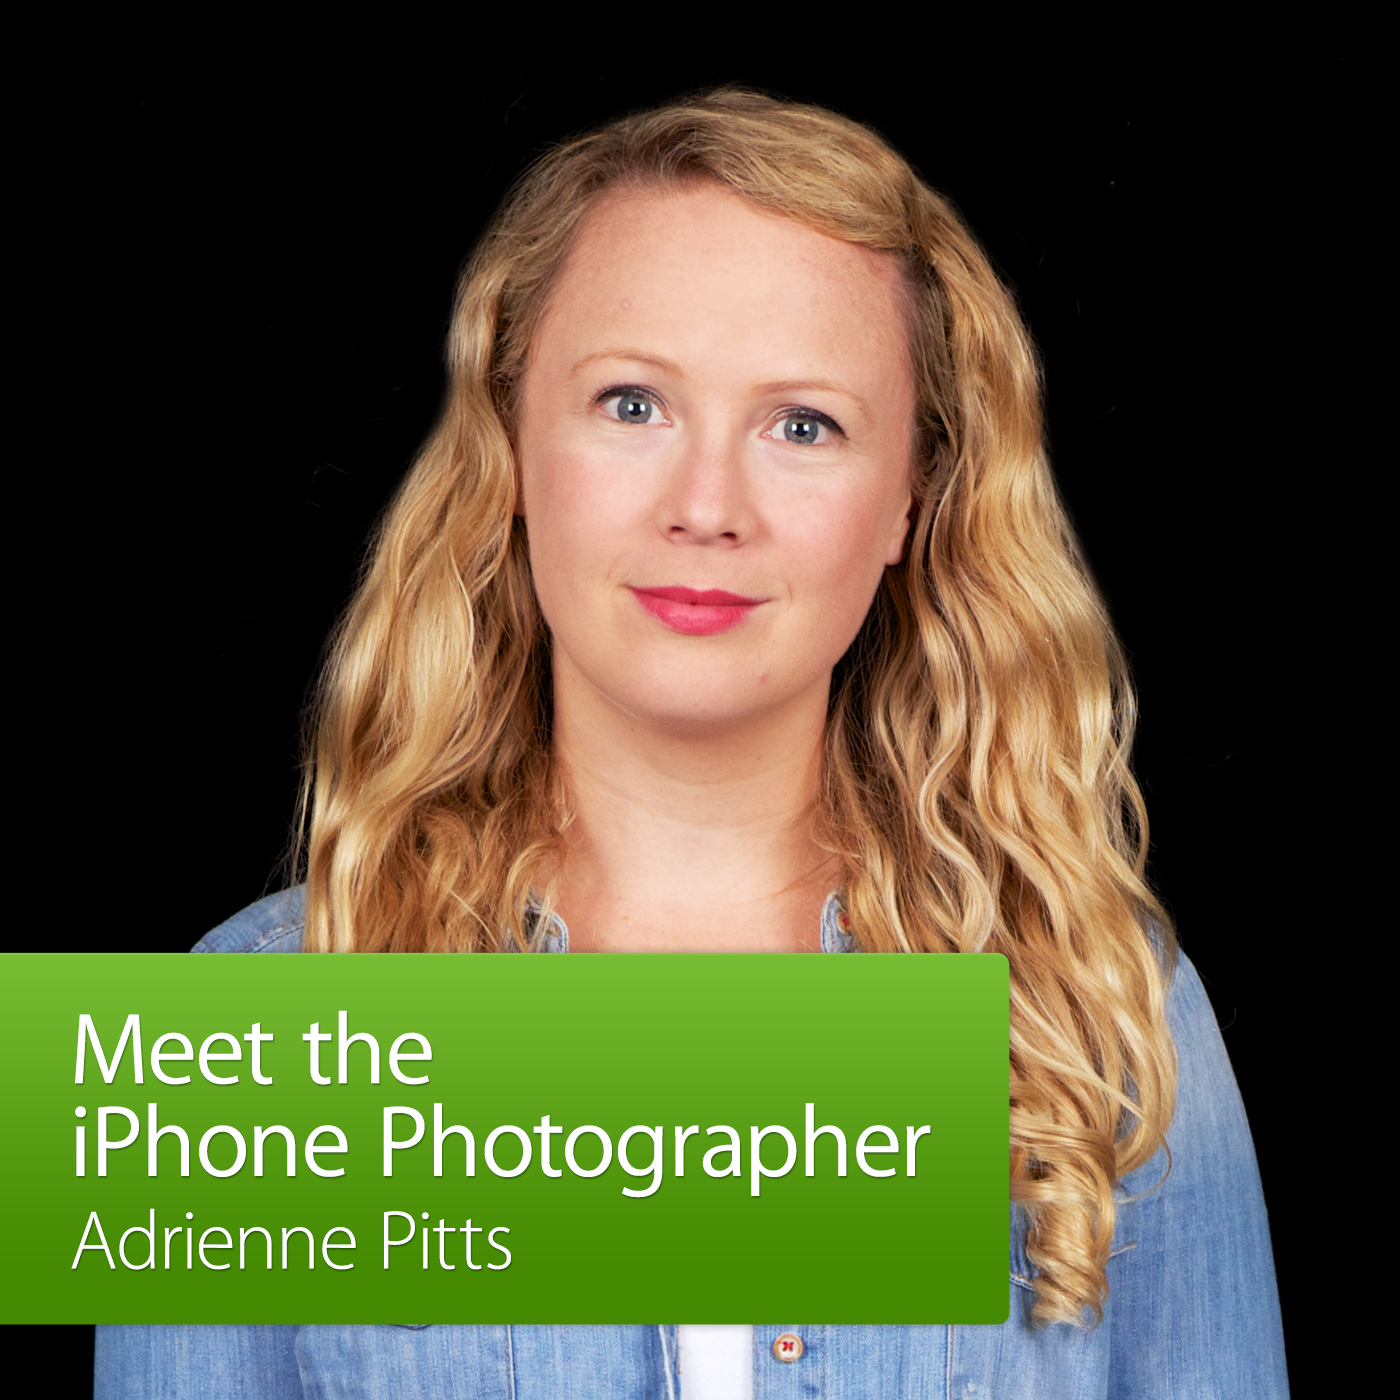 Adrienne Pitts: Meet the iPhone Photographer